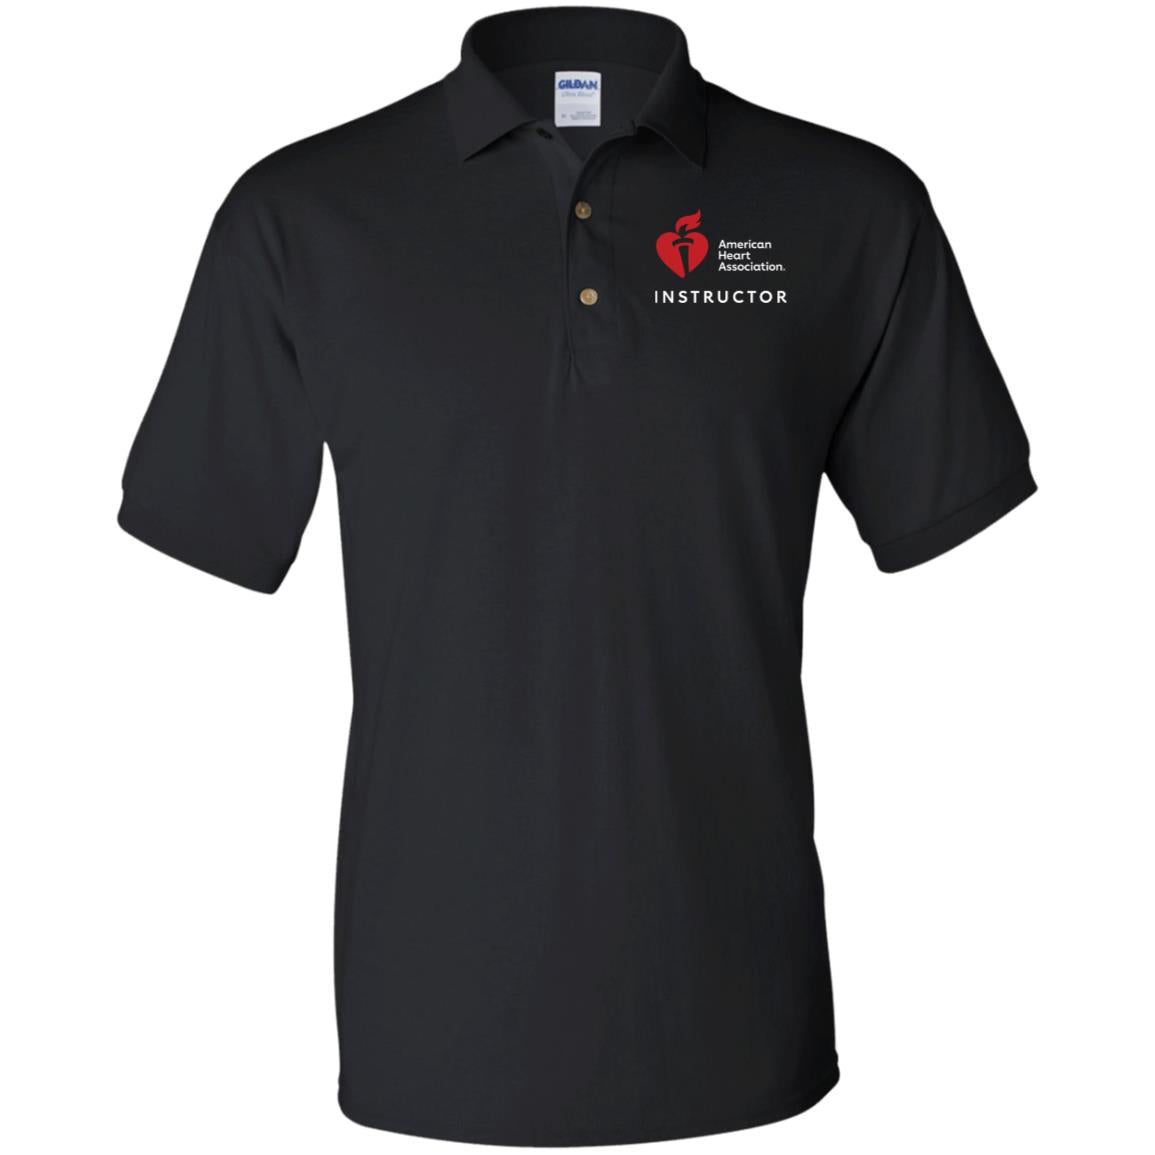 Black polo with AHA Heart and Torch logo with "INSTRUCTOR" below featured on left chest